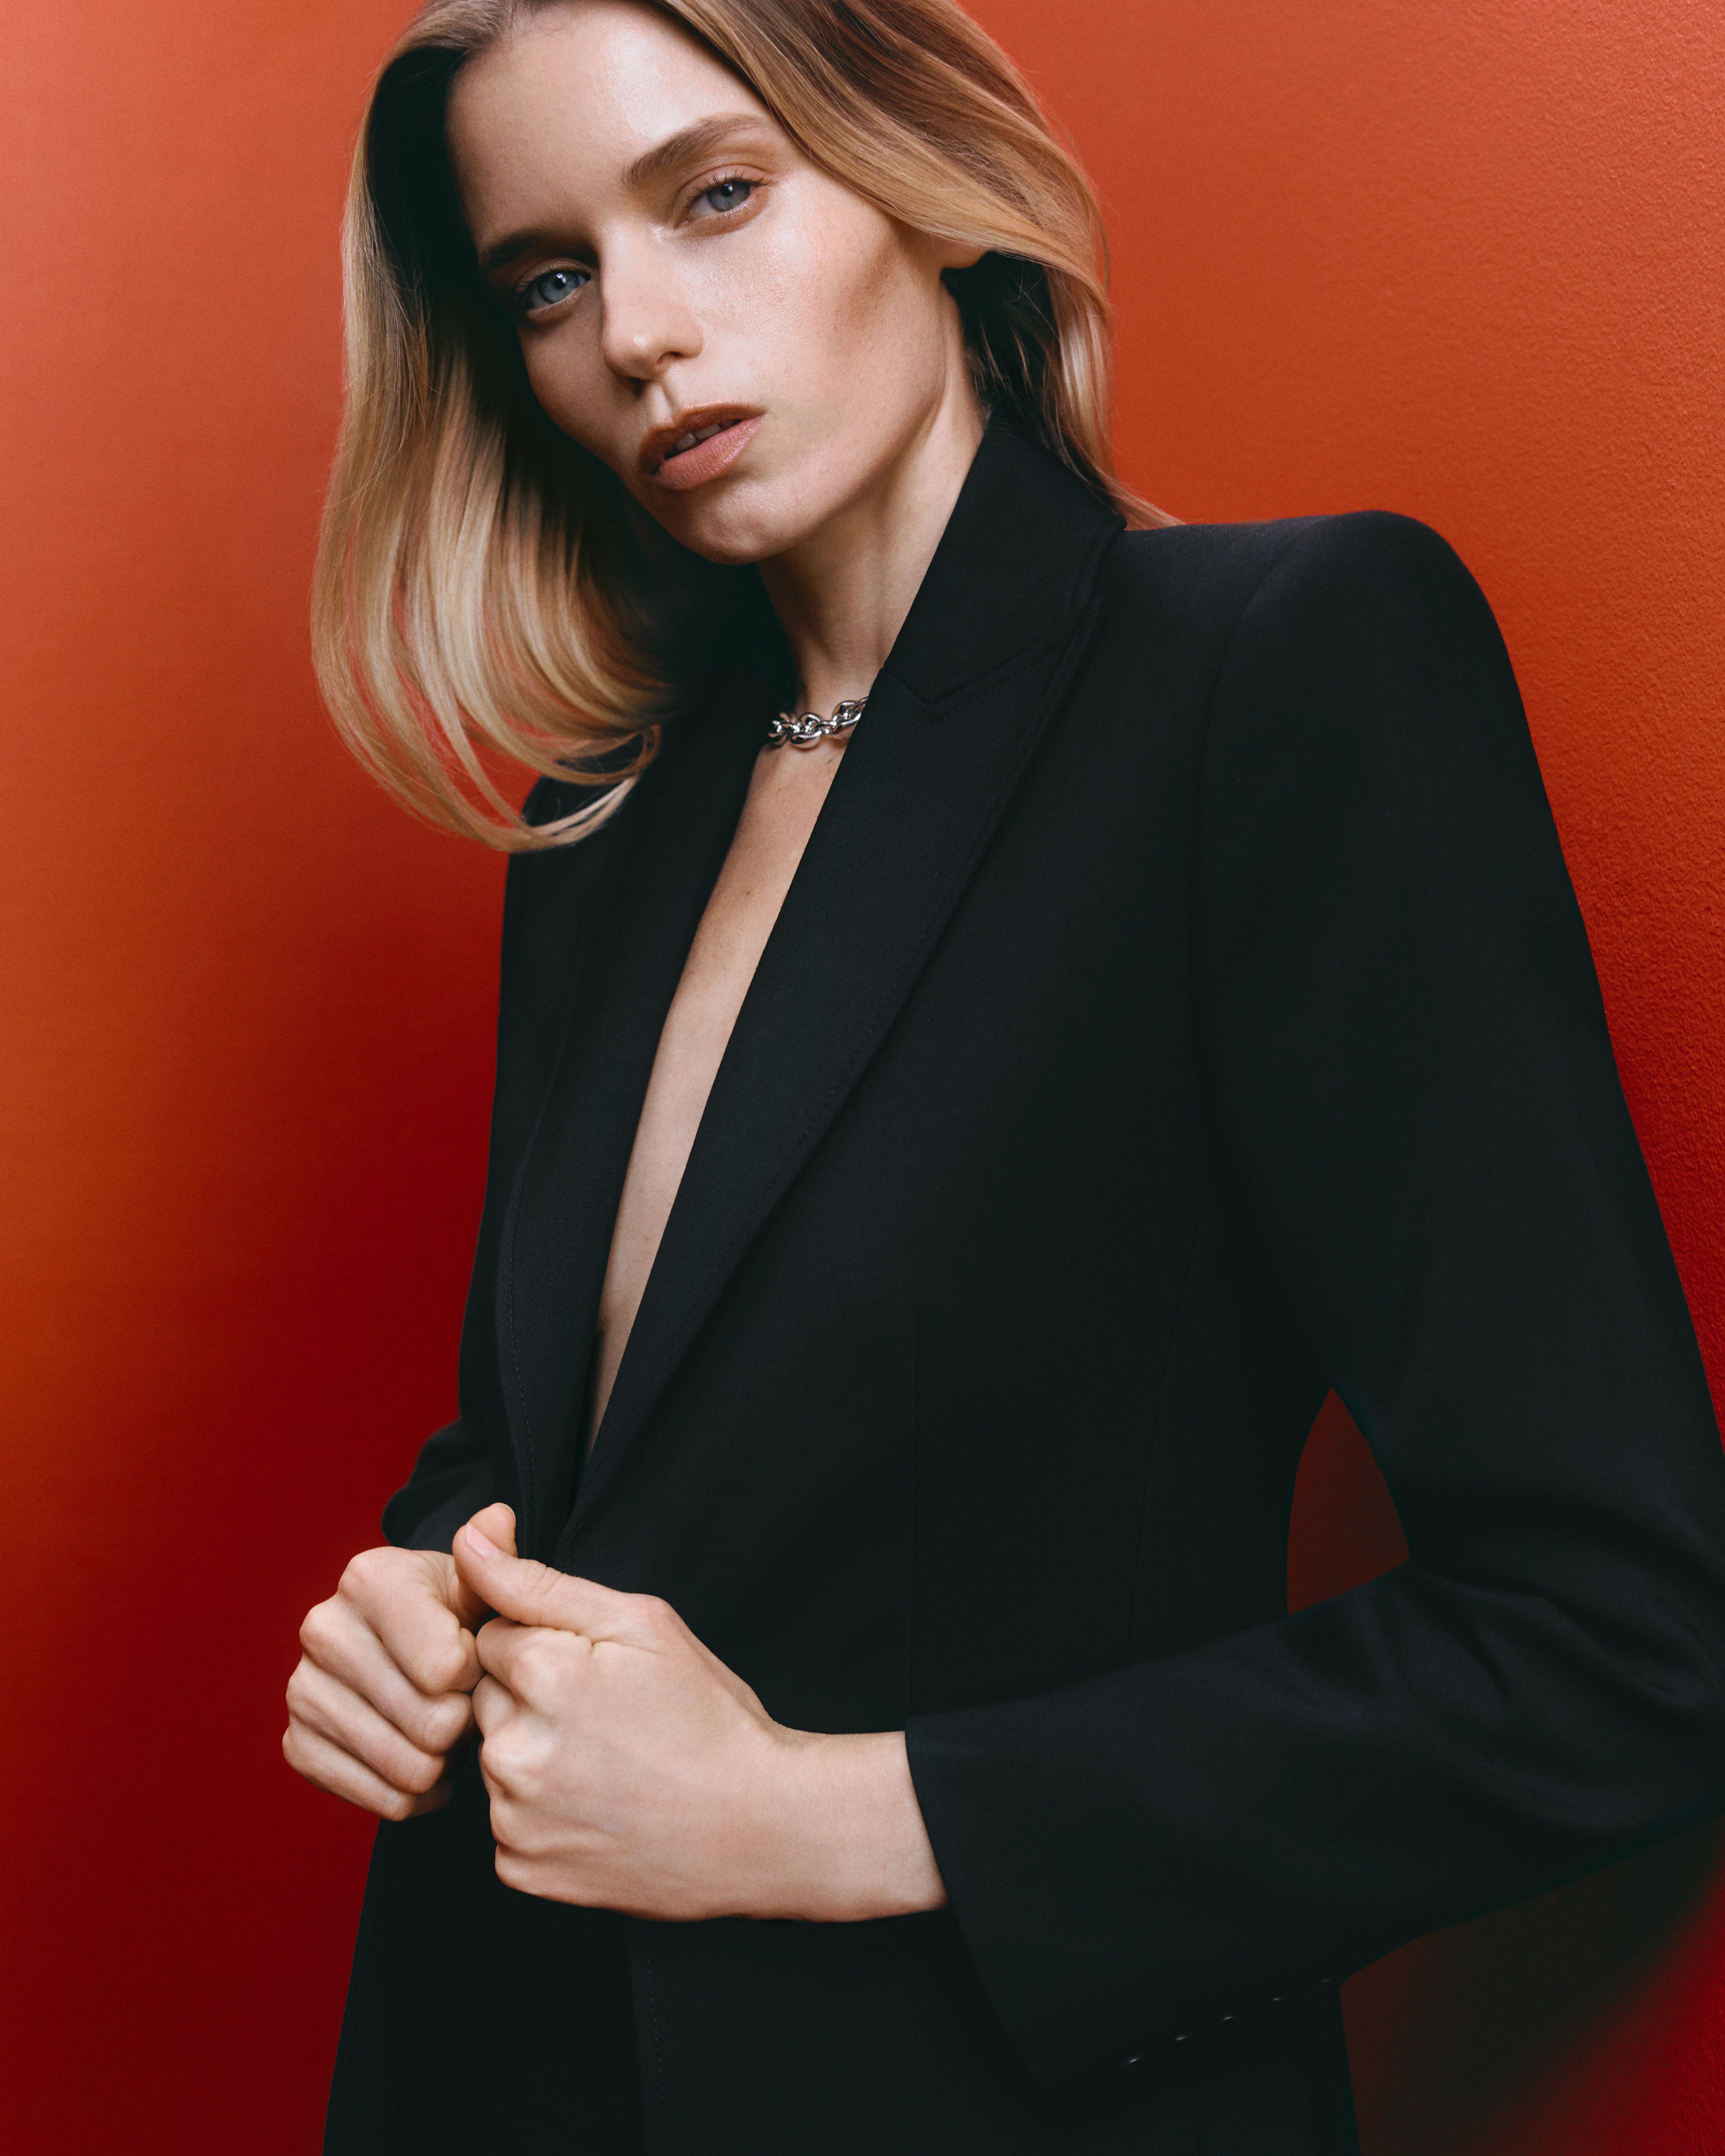 Abbey Lee wearing a black suit jacket with hands on the lapels